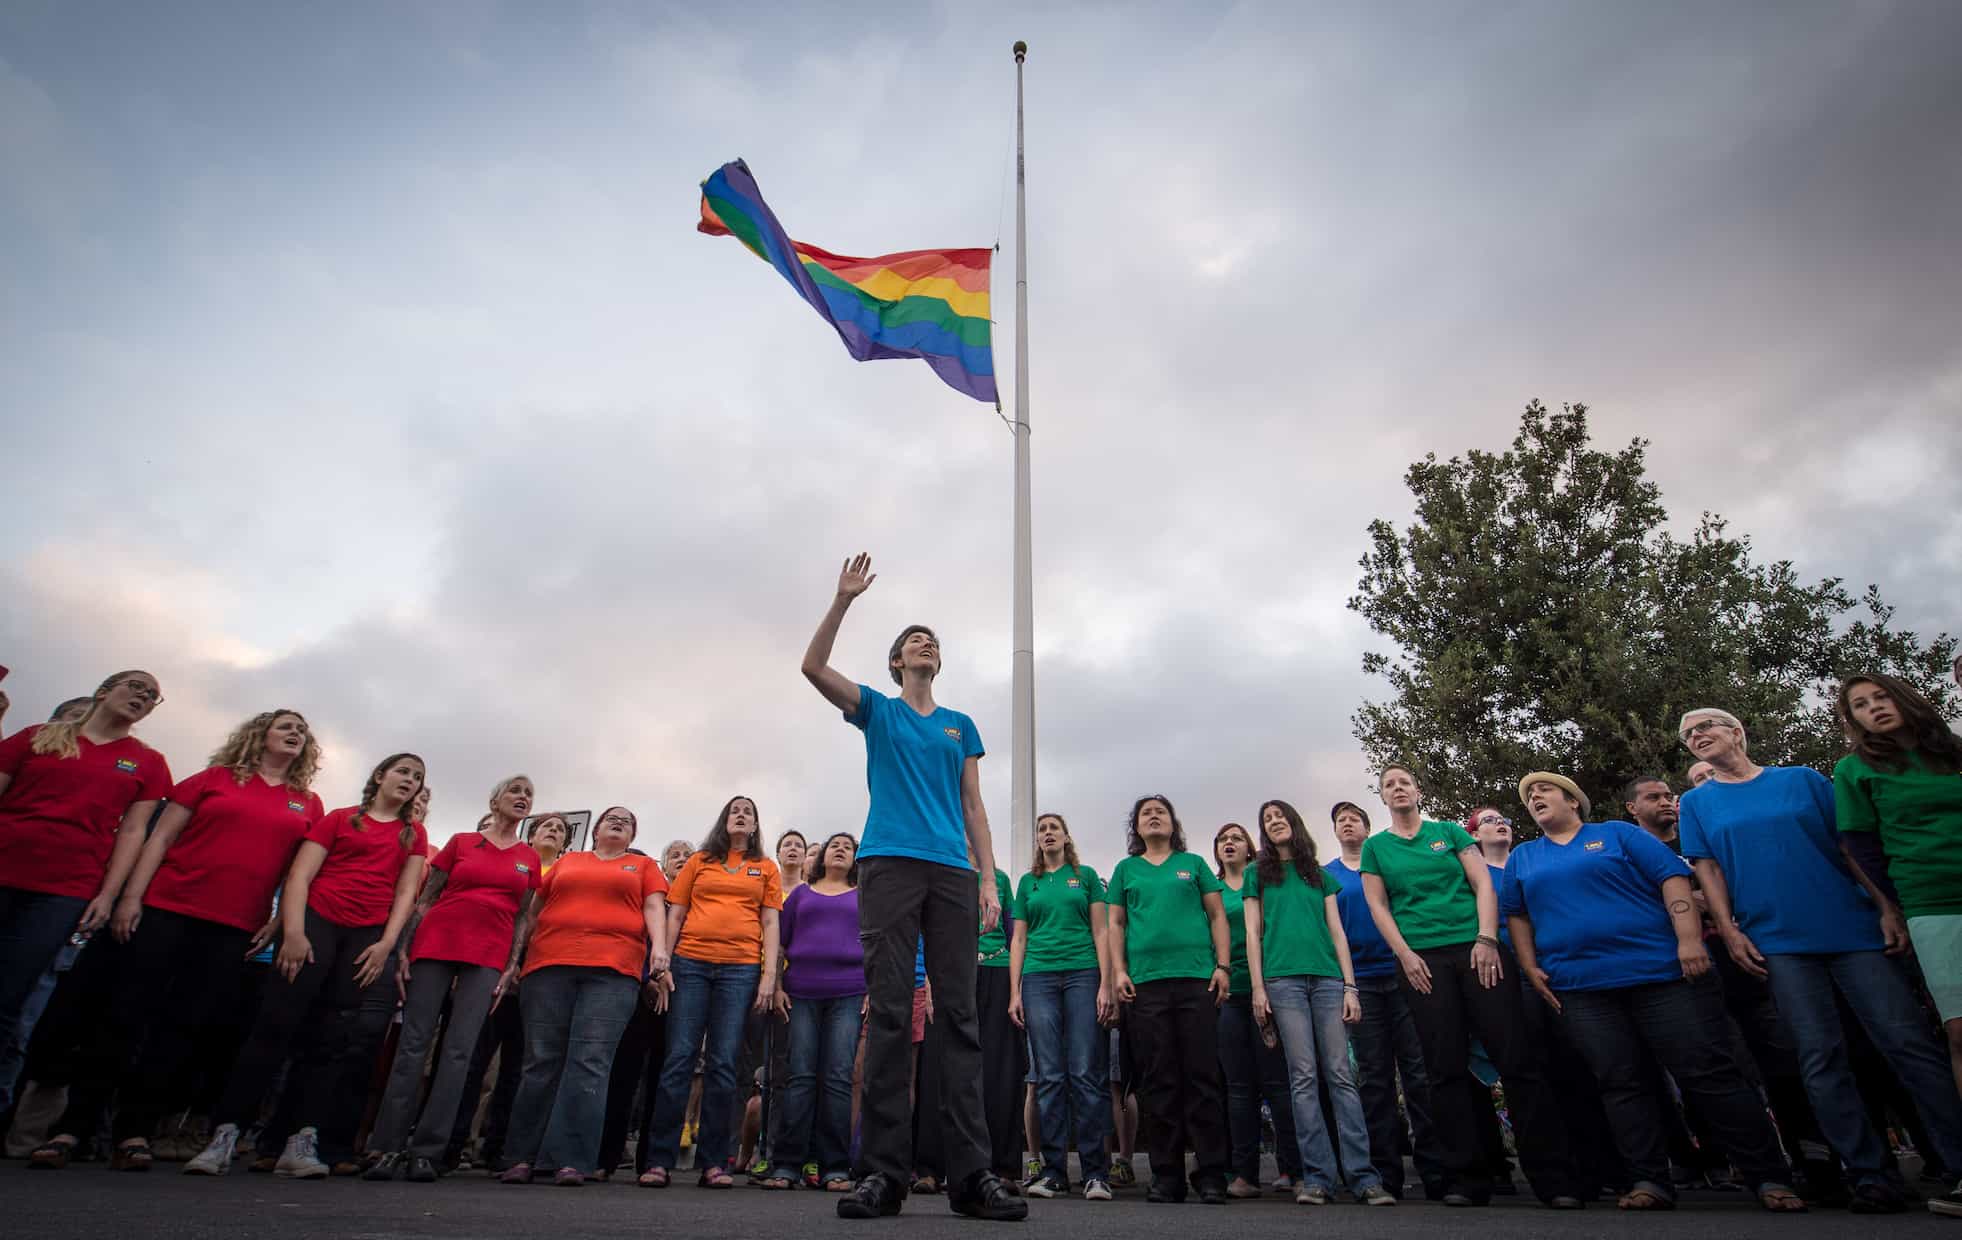 Local LGBT community gathers for candlelight vigil in San Diego